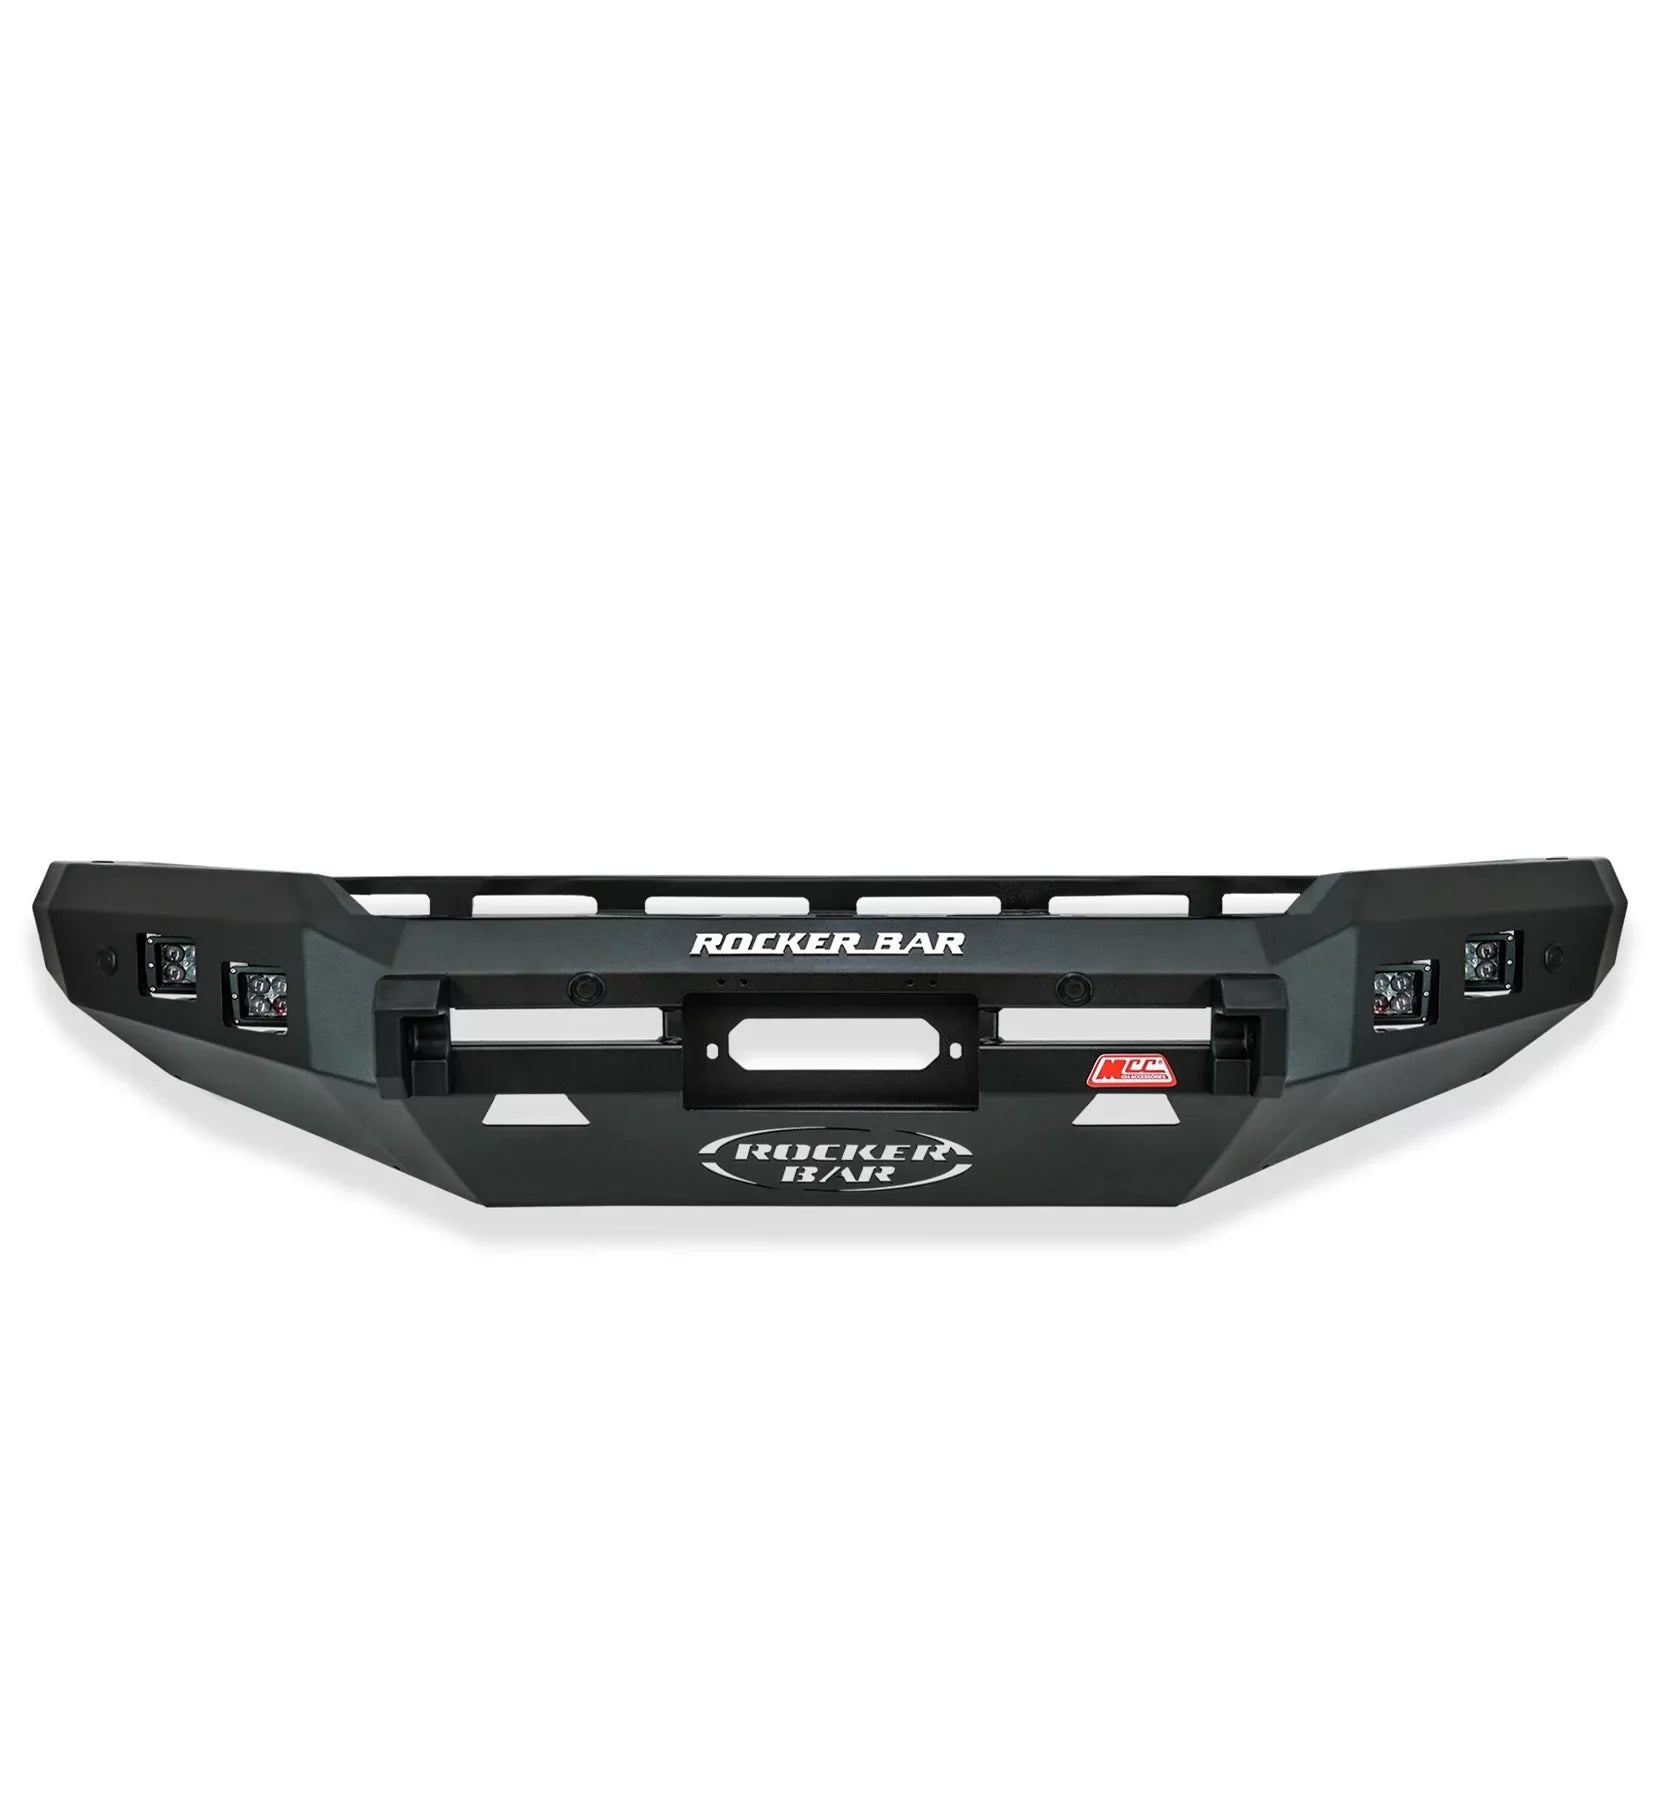 100s/105s 078-01sq Rocker Front Bar Square Light No Loop + Bracket + Underprotection Plate If Available